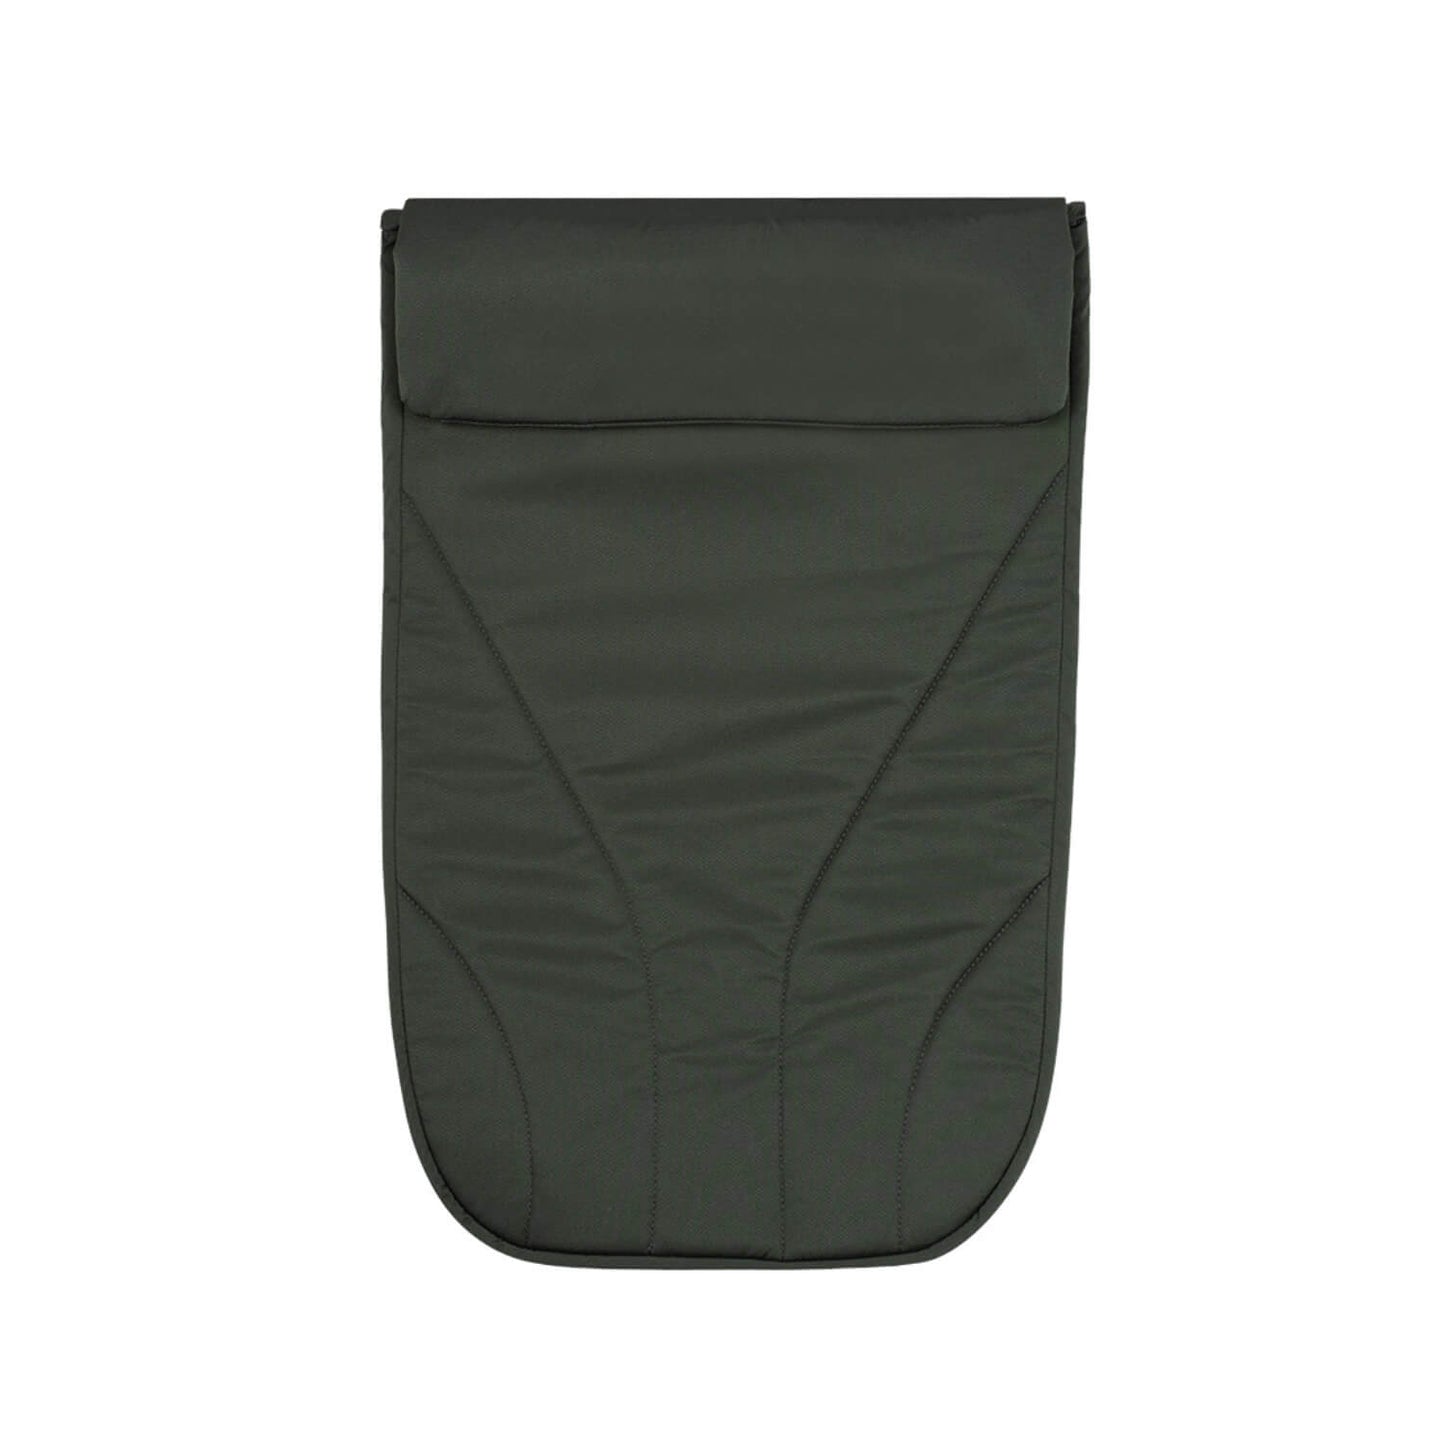 Front view of Venicci Claro footmuff in Forest green colour